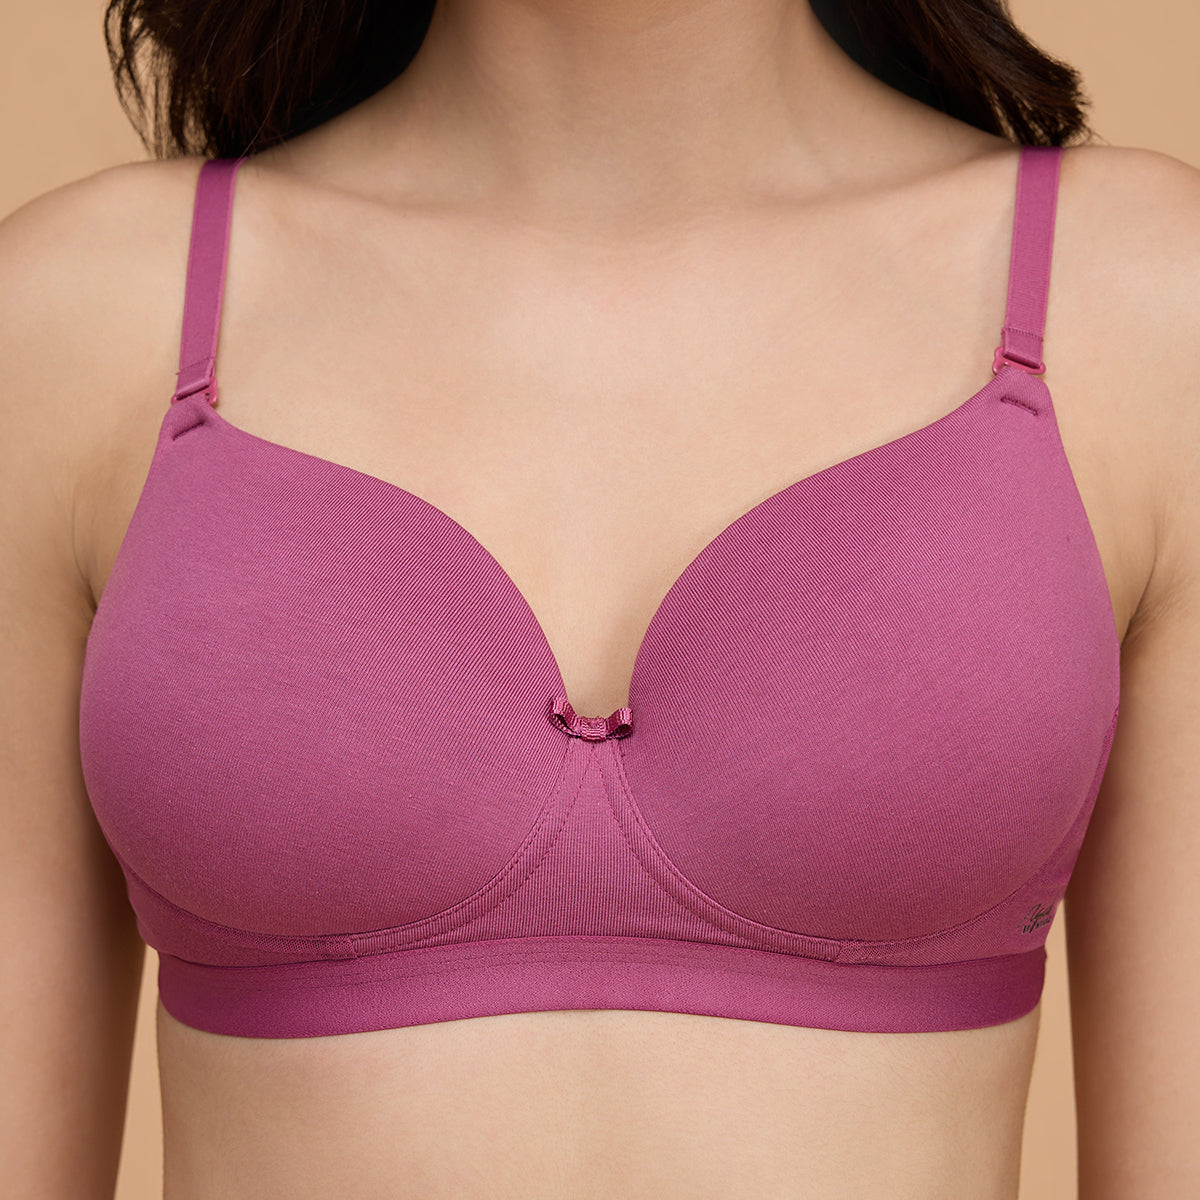 Nykd By Nykaa Breathe Cotton Padded wireless Transparent back bra 3/4th coverage Rose NYB007